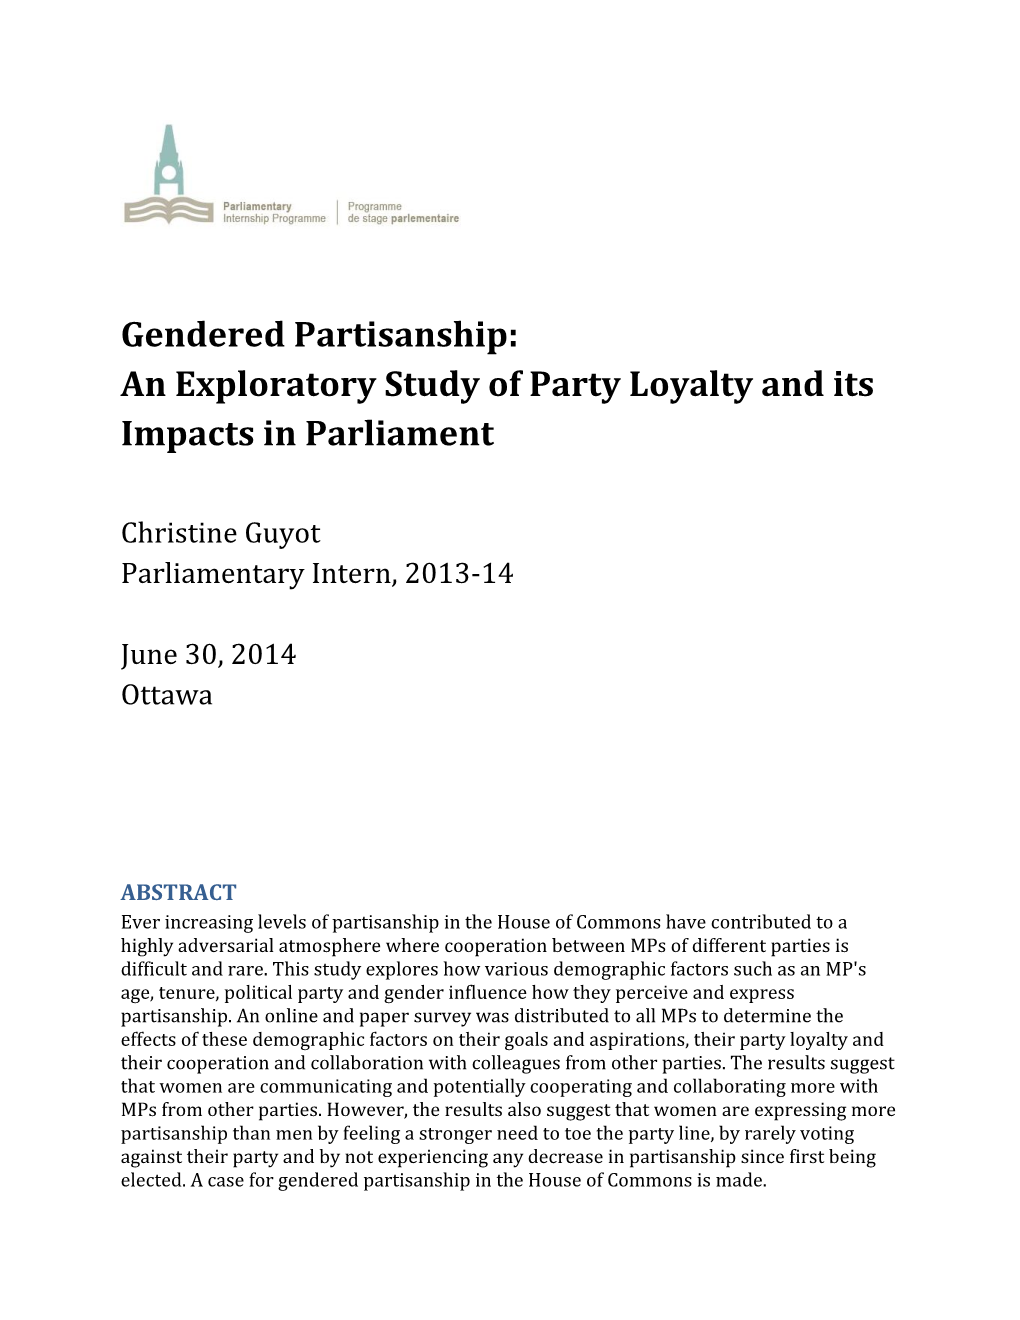 Gendered Partisanship: an Exploratory Study of Party Loyalty and Its Impacts in Parliament